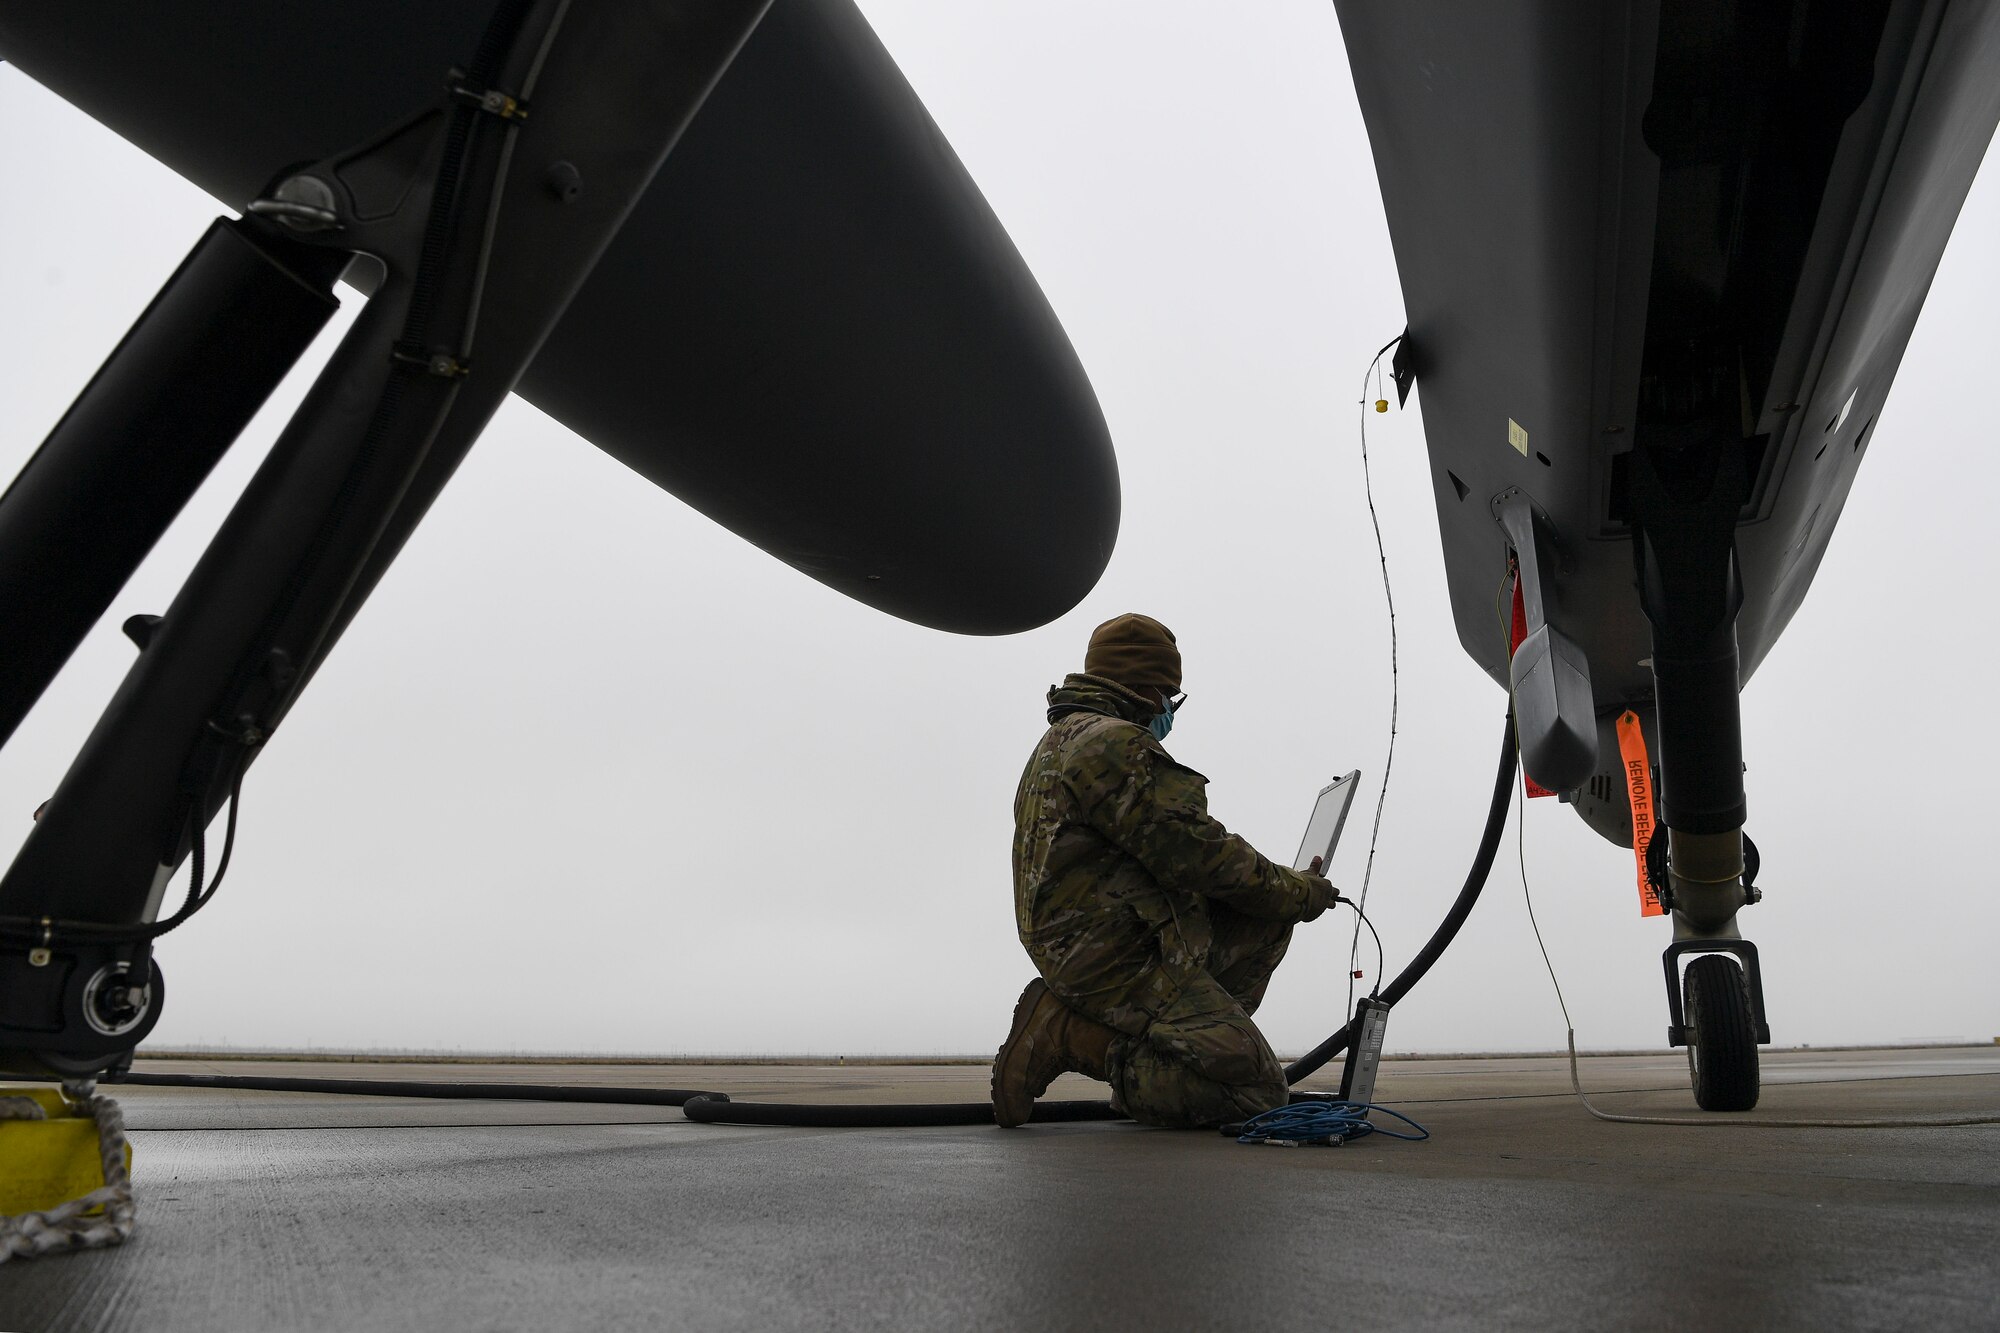 The U.S. Air Force has deployed MQ-9 Reaper aircraft and approximately 90 Airmen to the 71st Air Base at Campia Turzii to conduct intelligence, surveillance and reconnaissance missions in support of NATO operations.